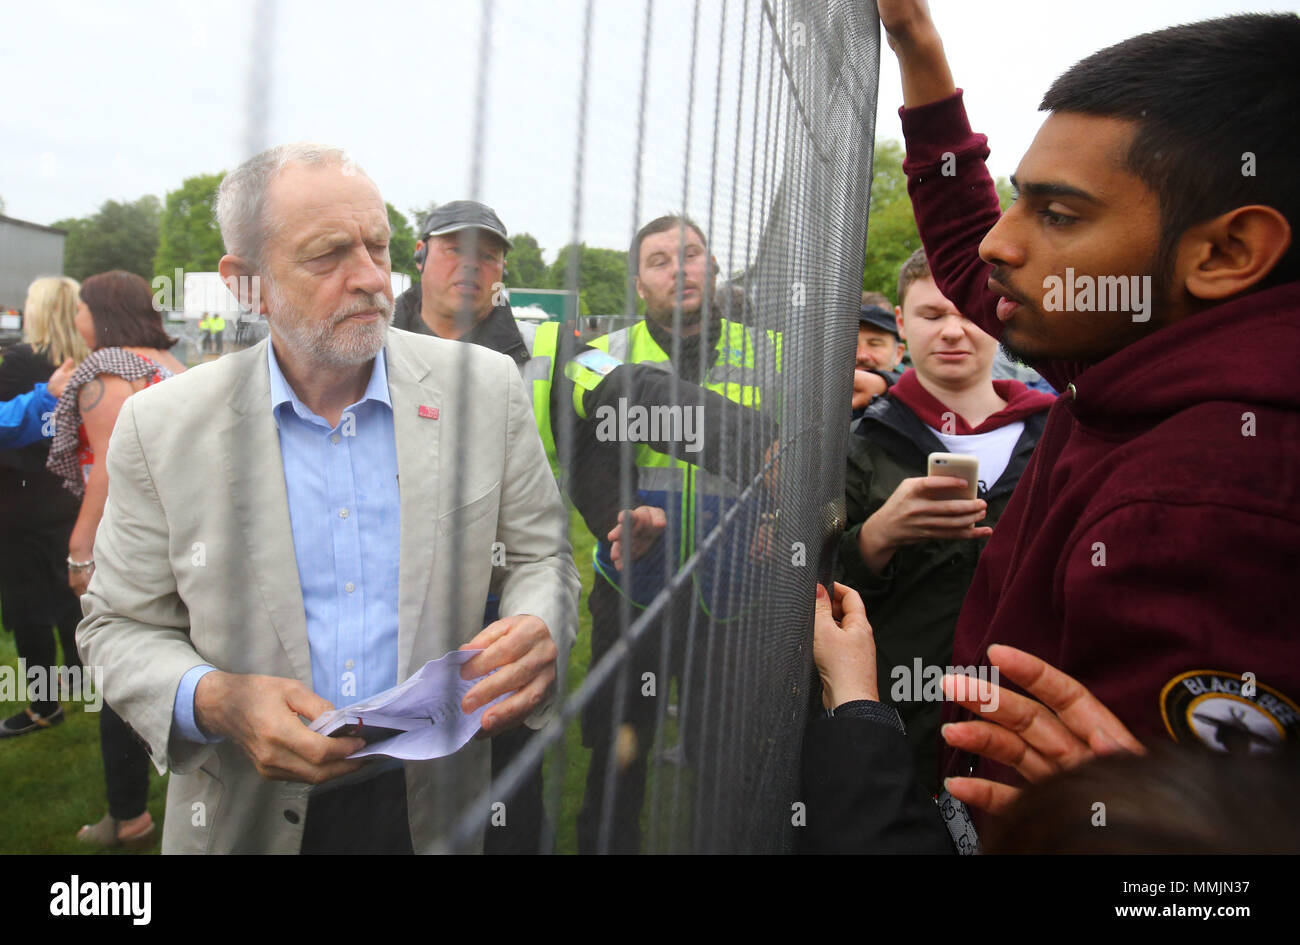 Labour leader Jeremy Corbyn speaks to TUC supporters from behind the fence during a TUC rally in central London, as part of its 'great jobs' campaign. Stock Photo